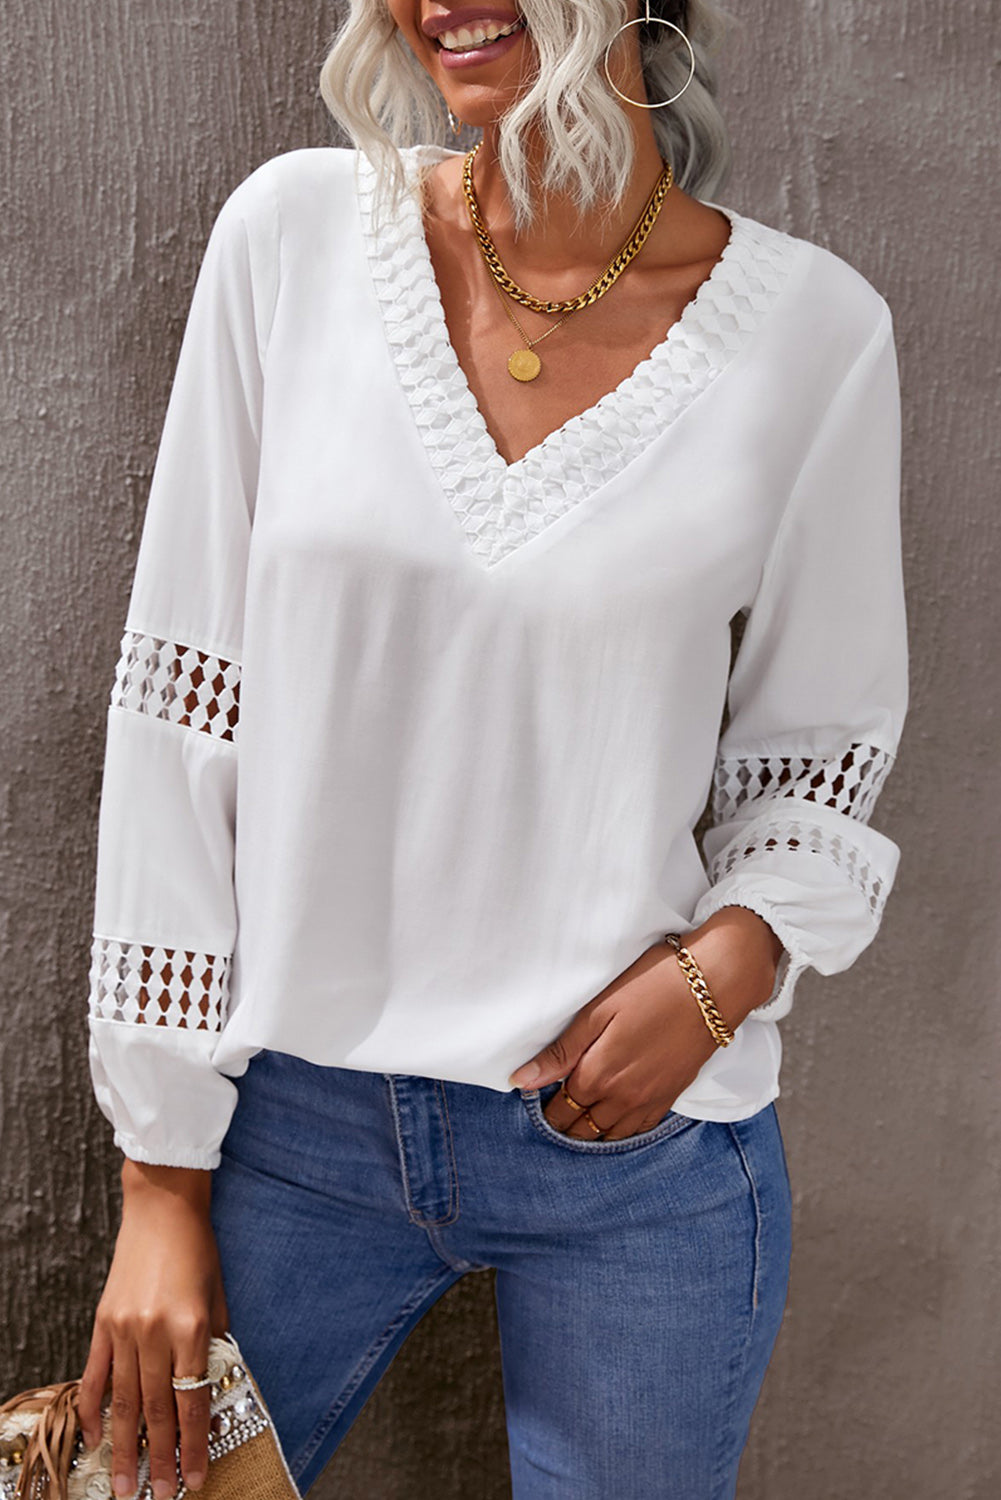 White Long Sleeve V Neck Crochet Hollow-out Blouse, Shop for cheap White Long Sleeve V Neck Crochet Hollow-out Blouse online? Buy at Modeshe.com on sale!